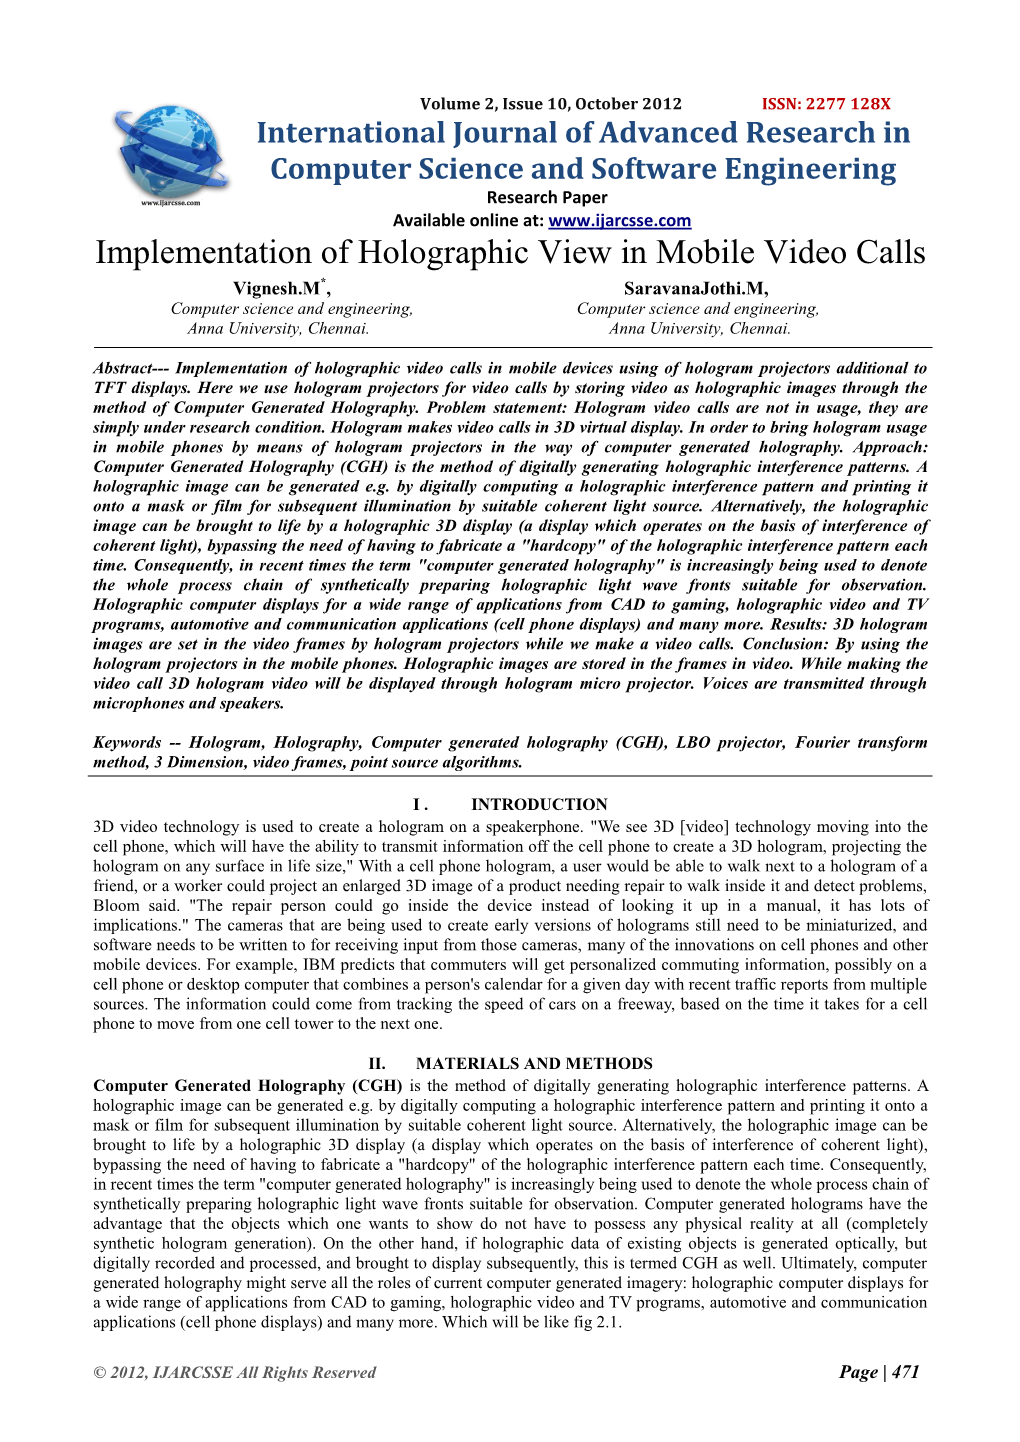 Implementation of Holographic View in Mobile Video Calls